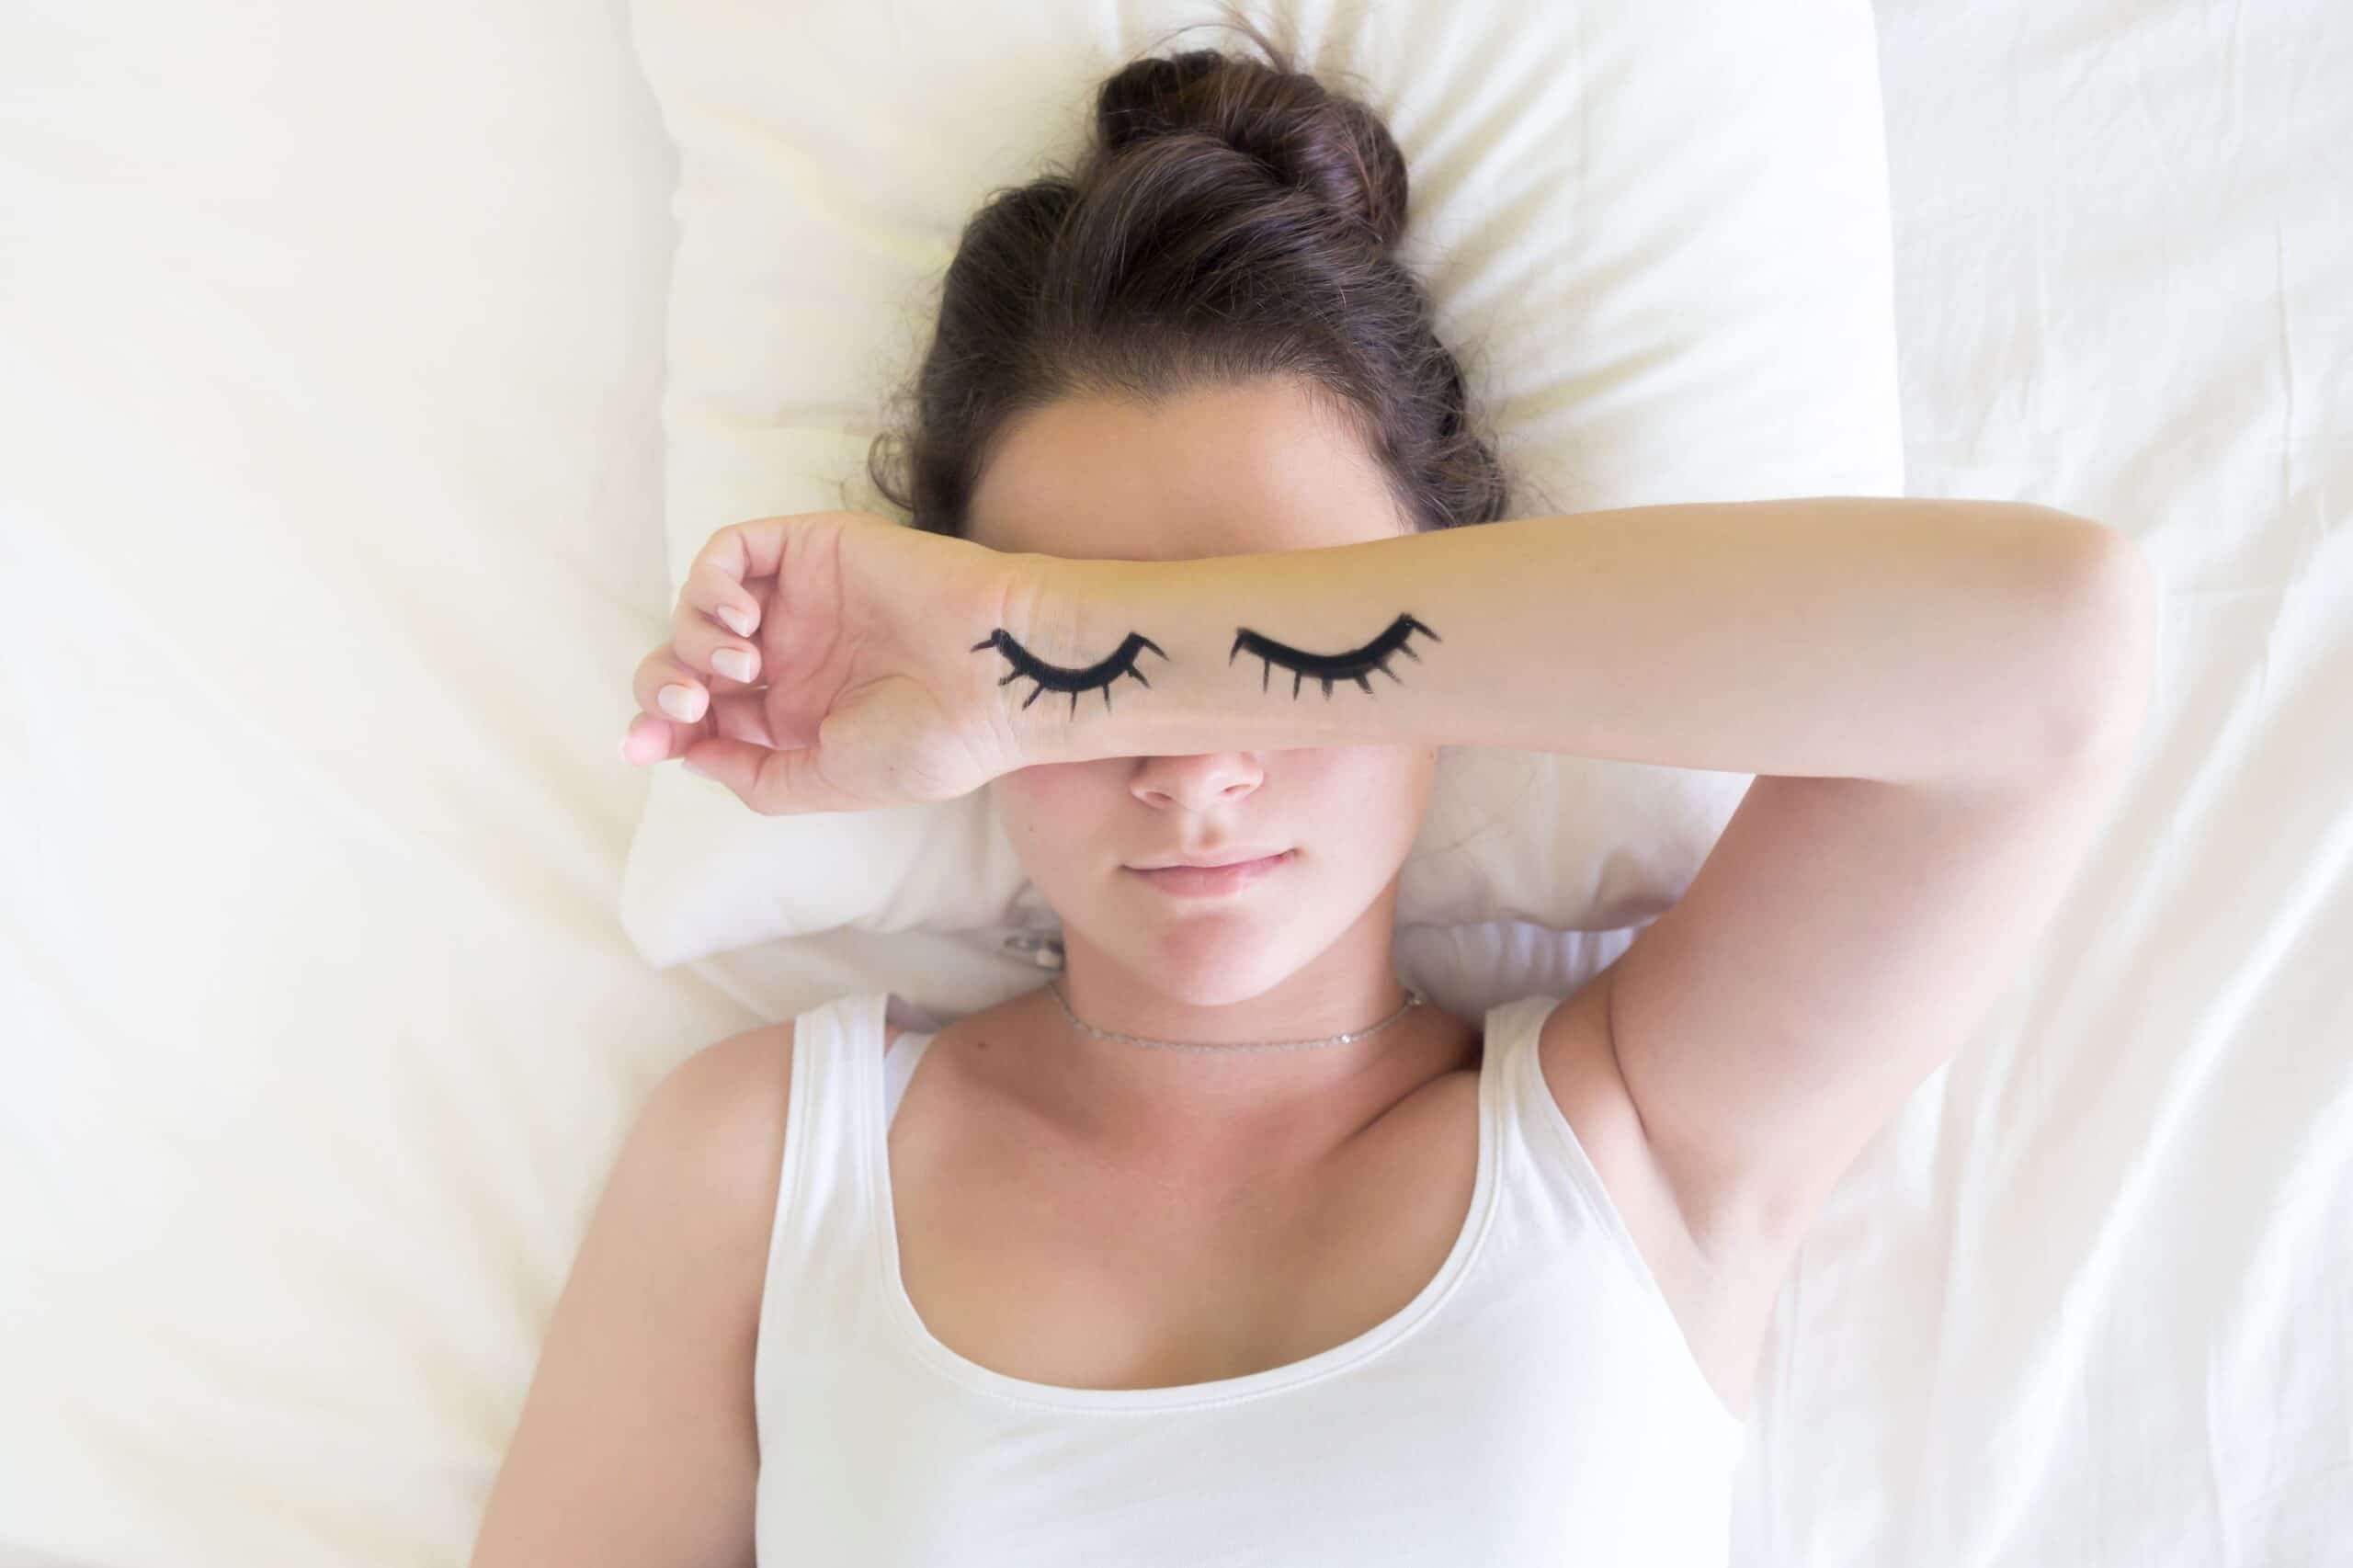 Woman sleeps with eyes drawn on arm scaled